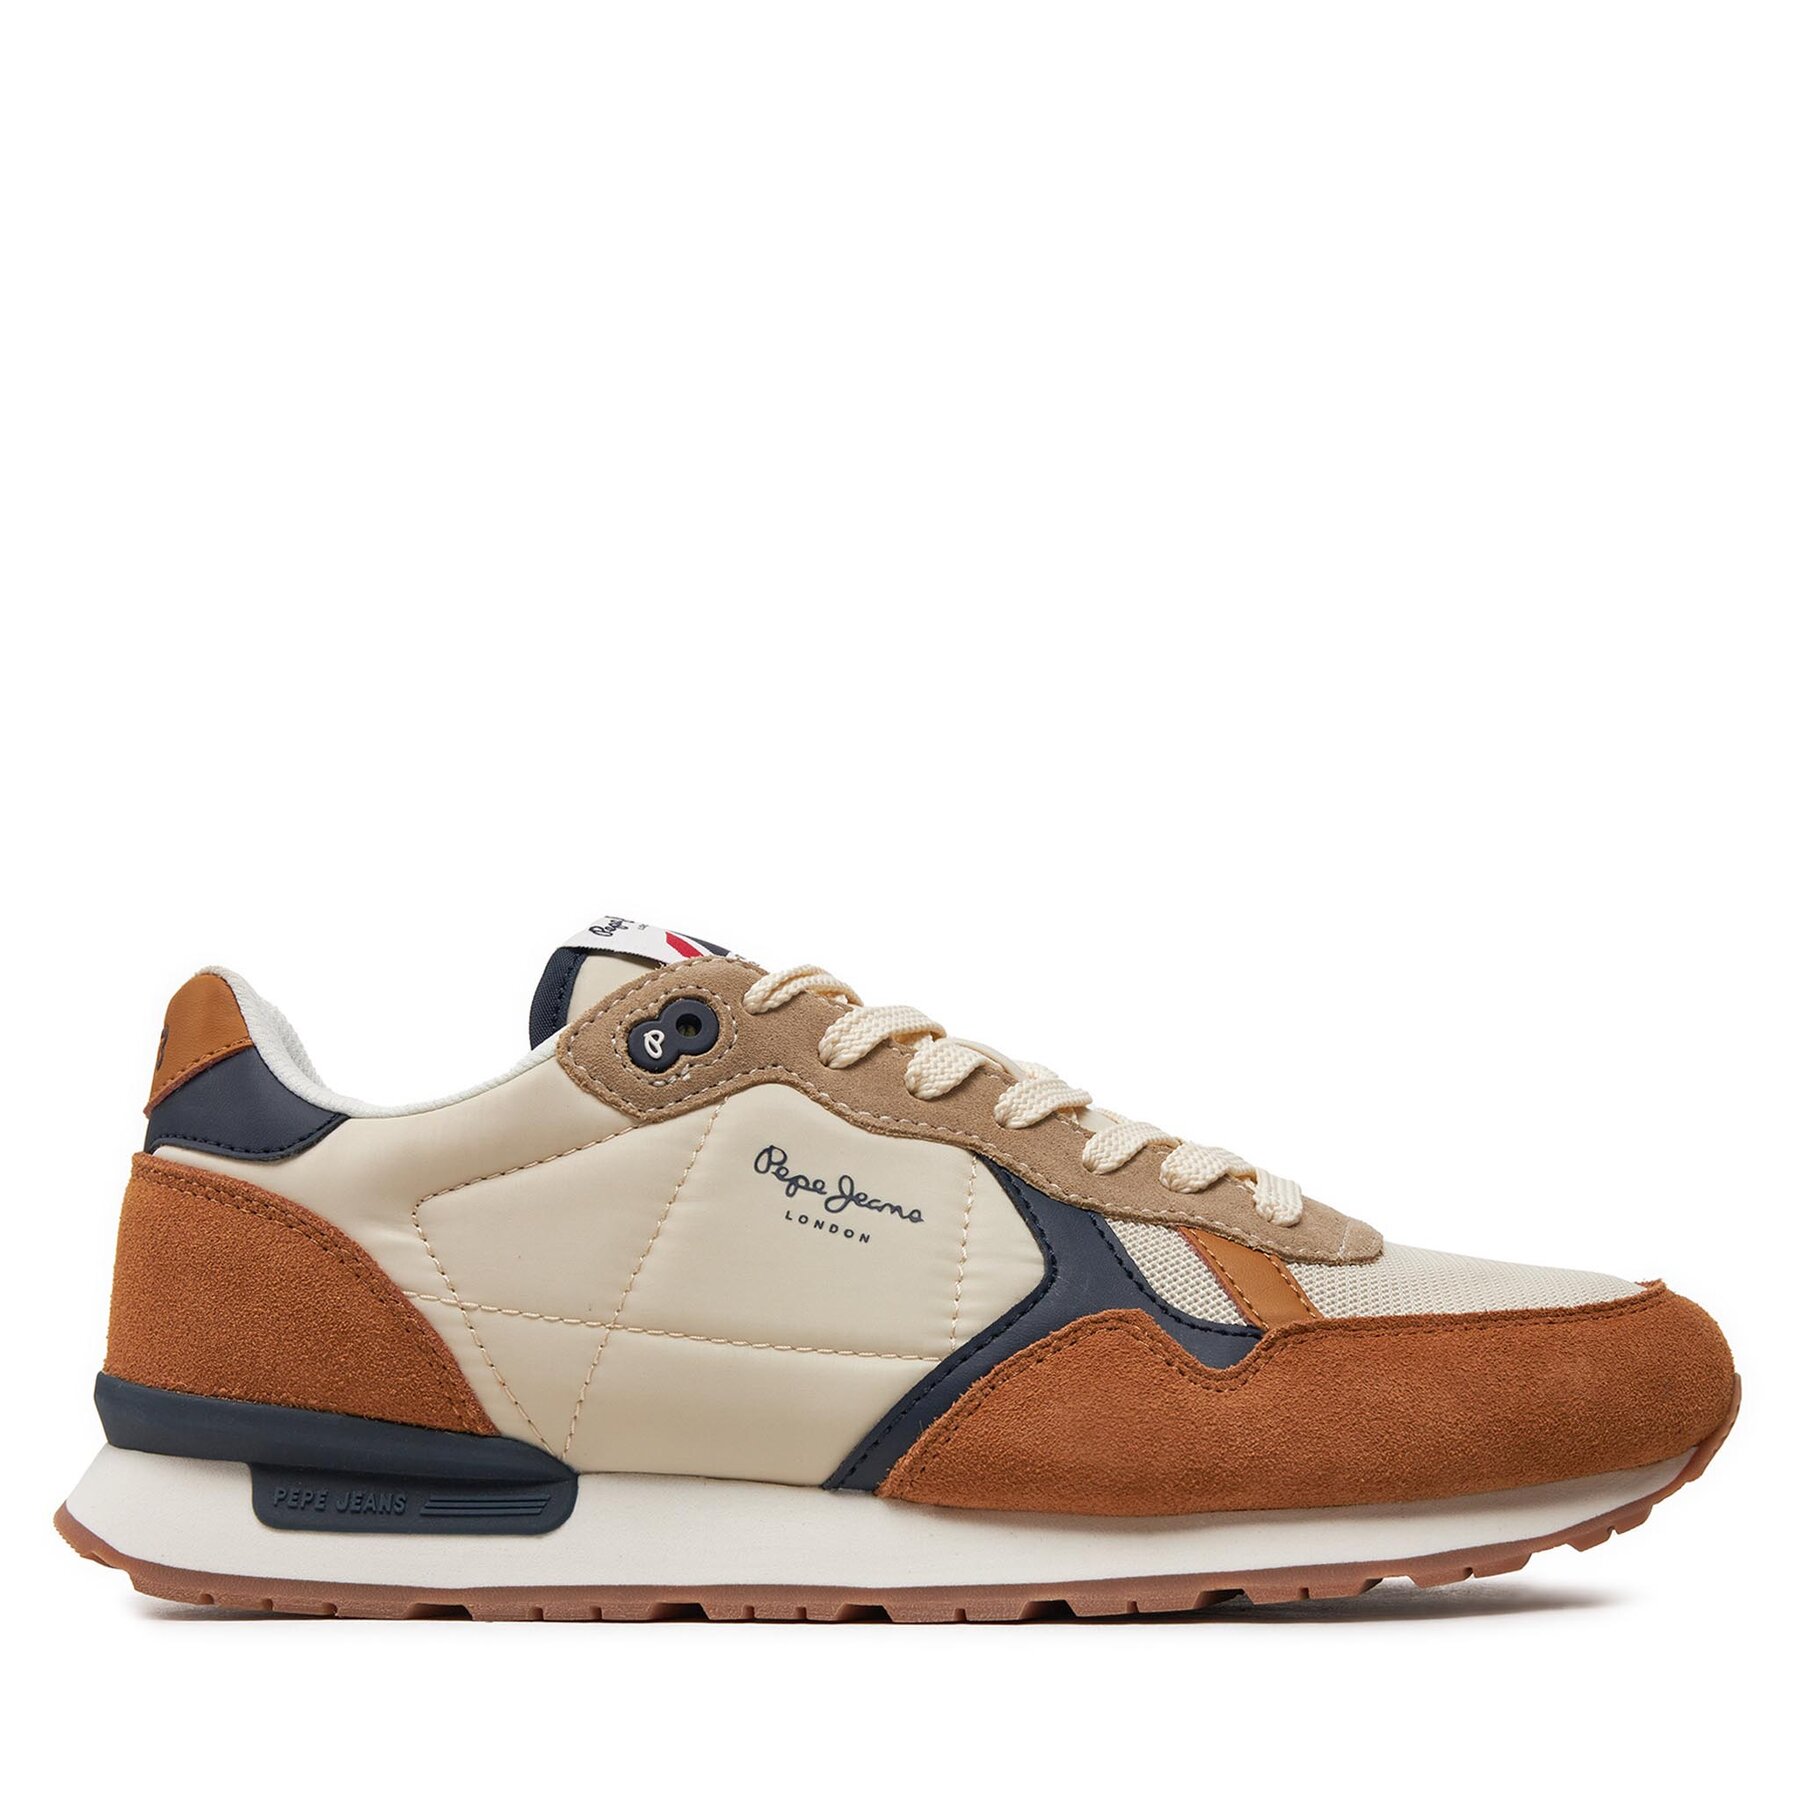 Sneakers Pepe Jeans Brit Mix M PMS40006 Tobacco Brown 859 von Pepe Jeans